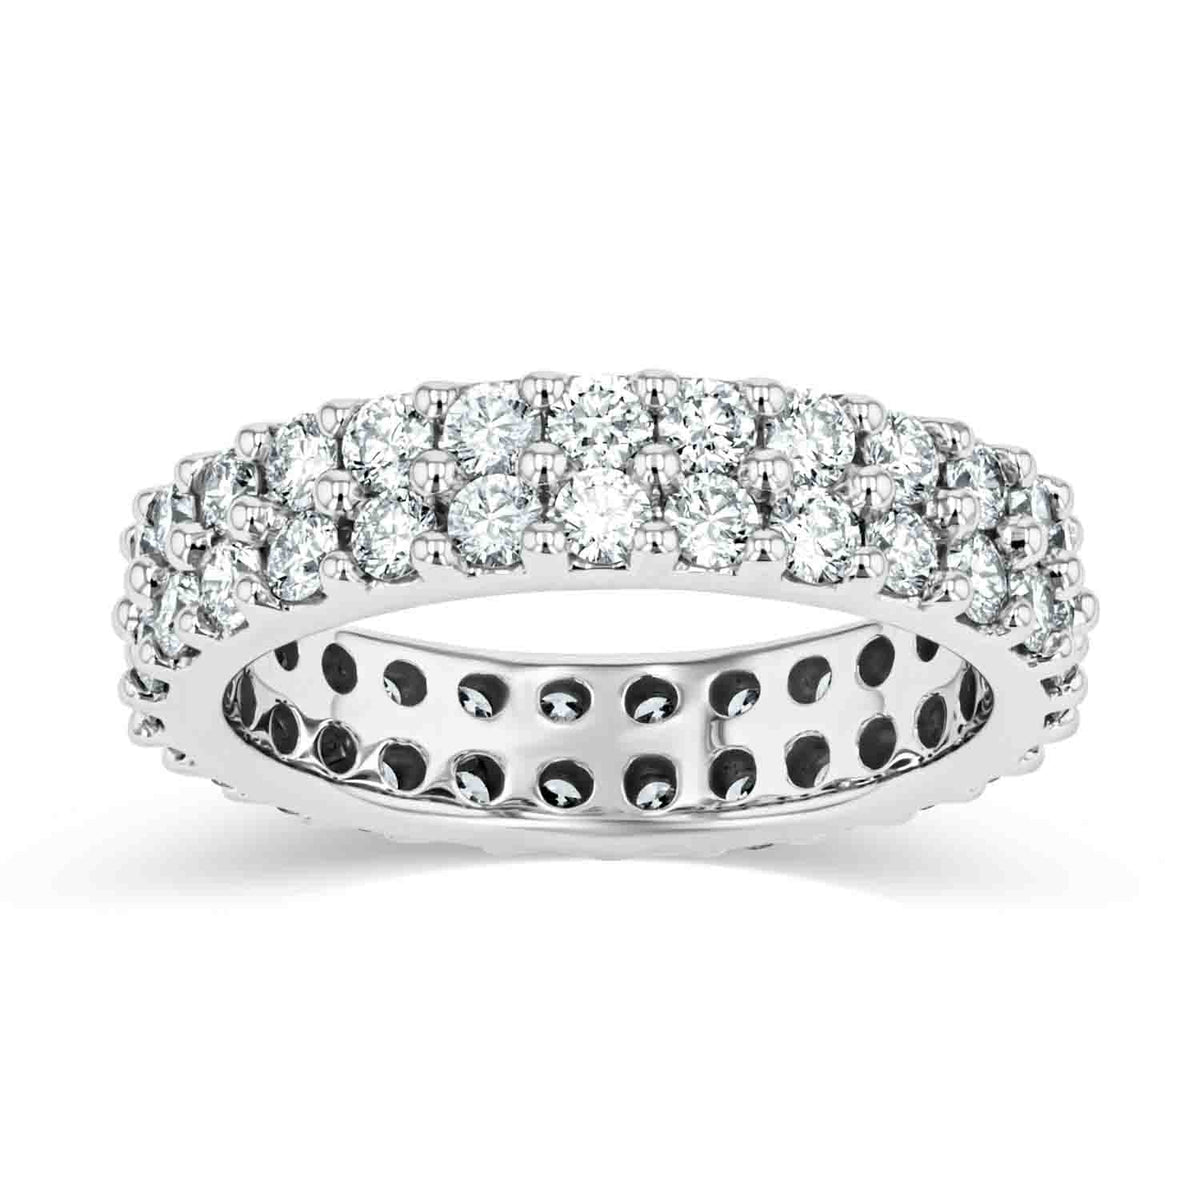 Golden Wedding Band Shown in 14K White Gold|double eternity band ring in 14k white gold